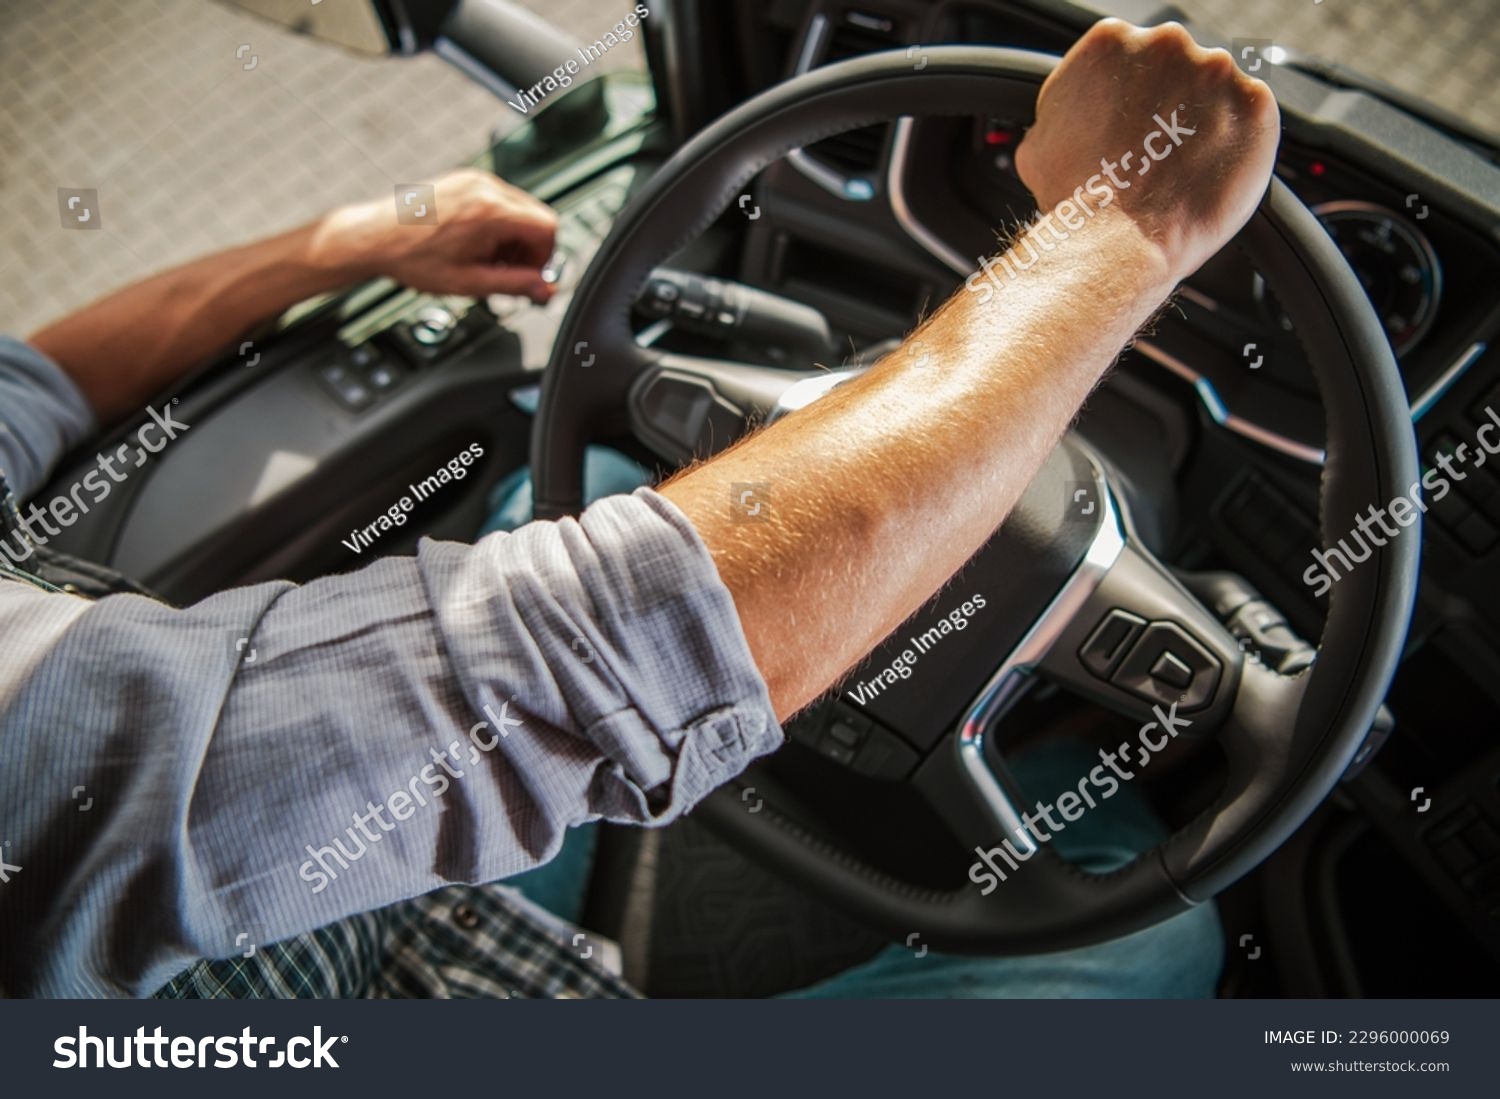 Truckers Hand on a Semi Truck Steering Wheel Close Up Photo. Caucasian Professional Driver Theme. Transportation Industry. #2296000069